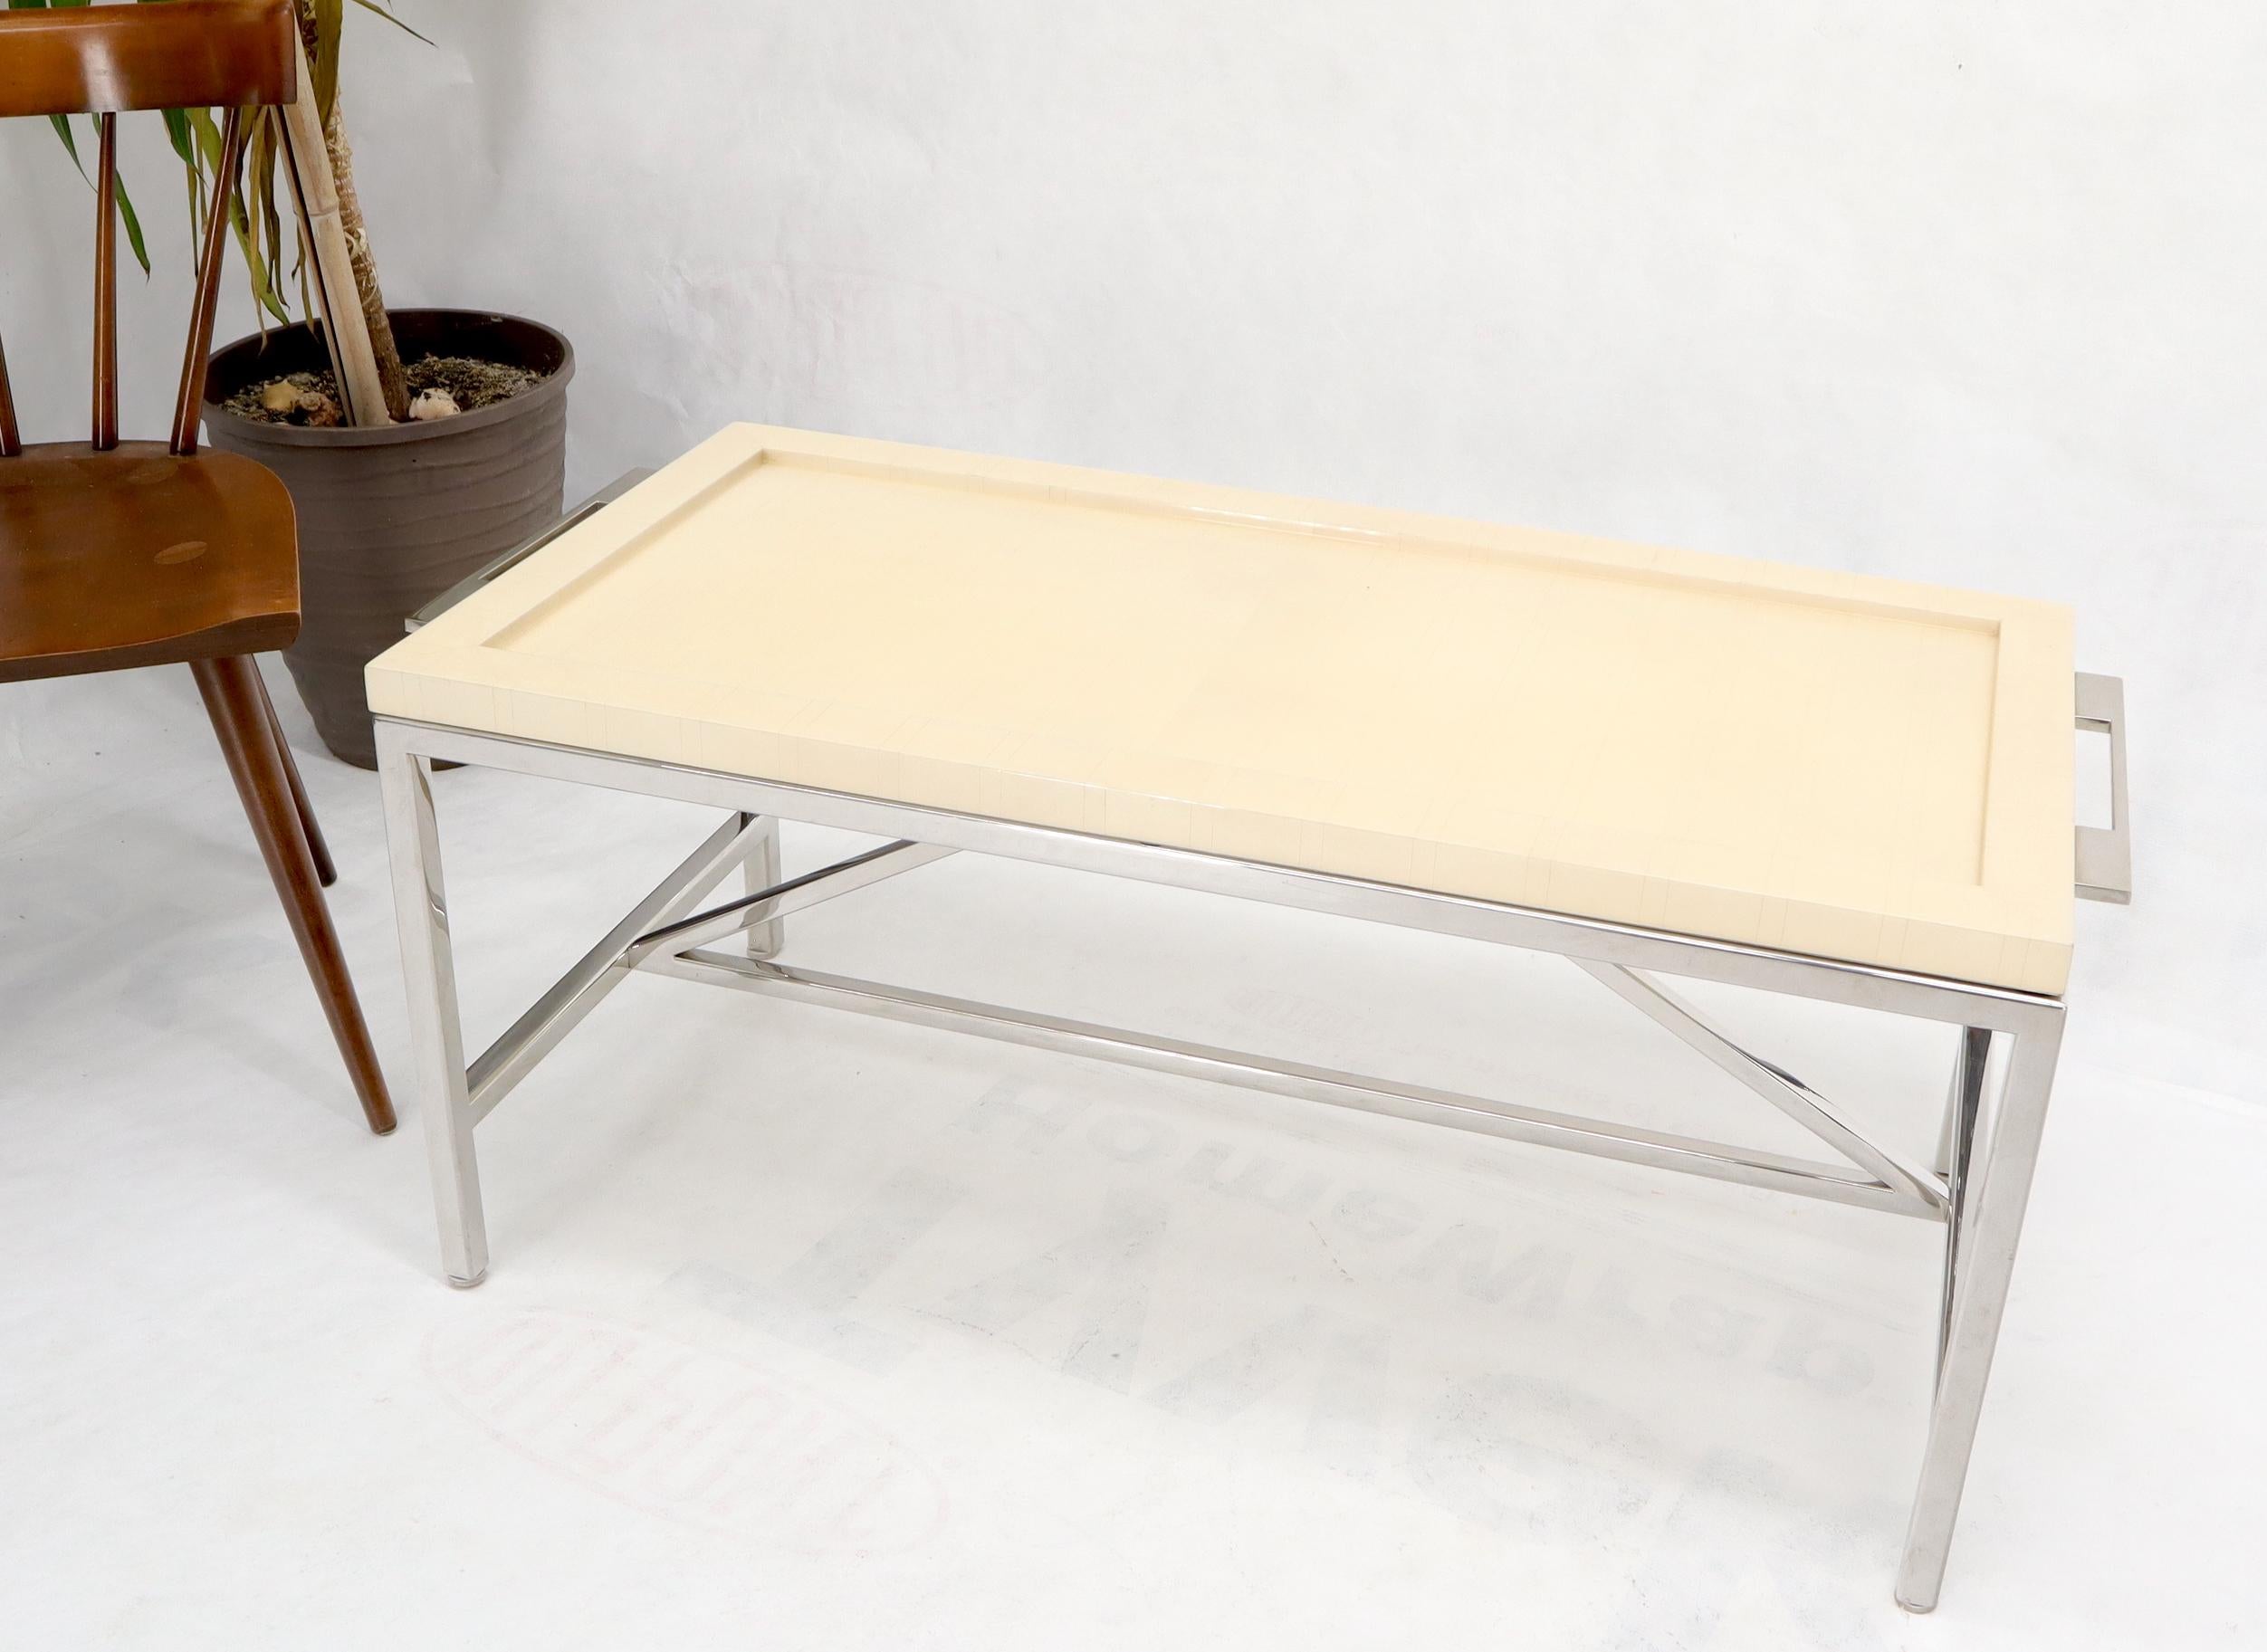 Lacquered Parchment Tray Stainless Steel Base Coffee Table In Excellent Condition For Sale In Rockaway, NJ